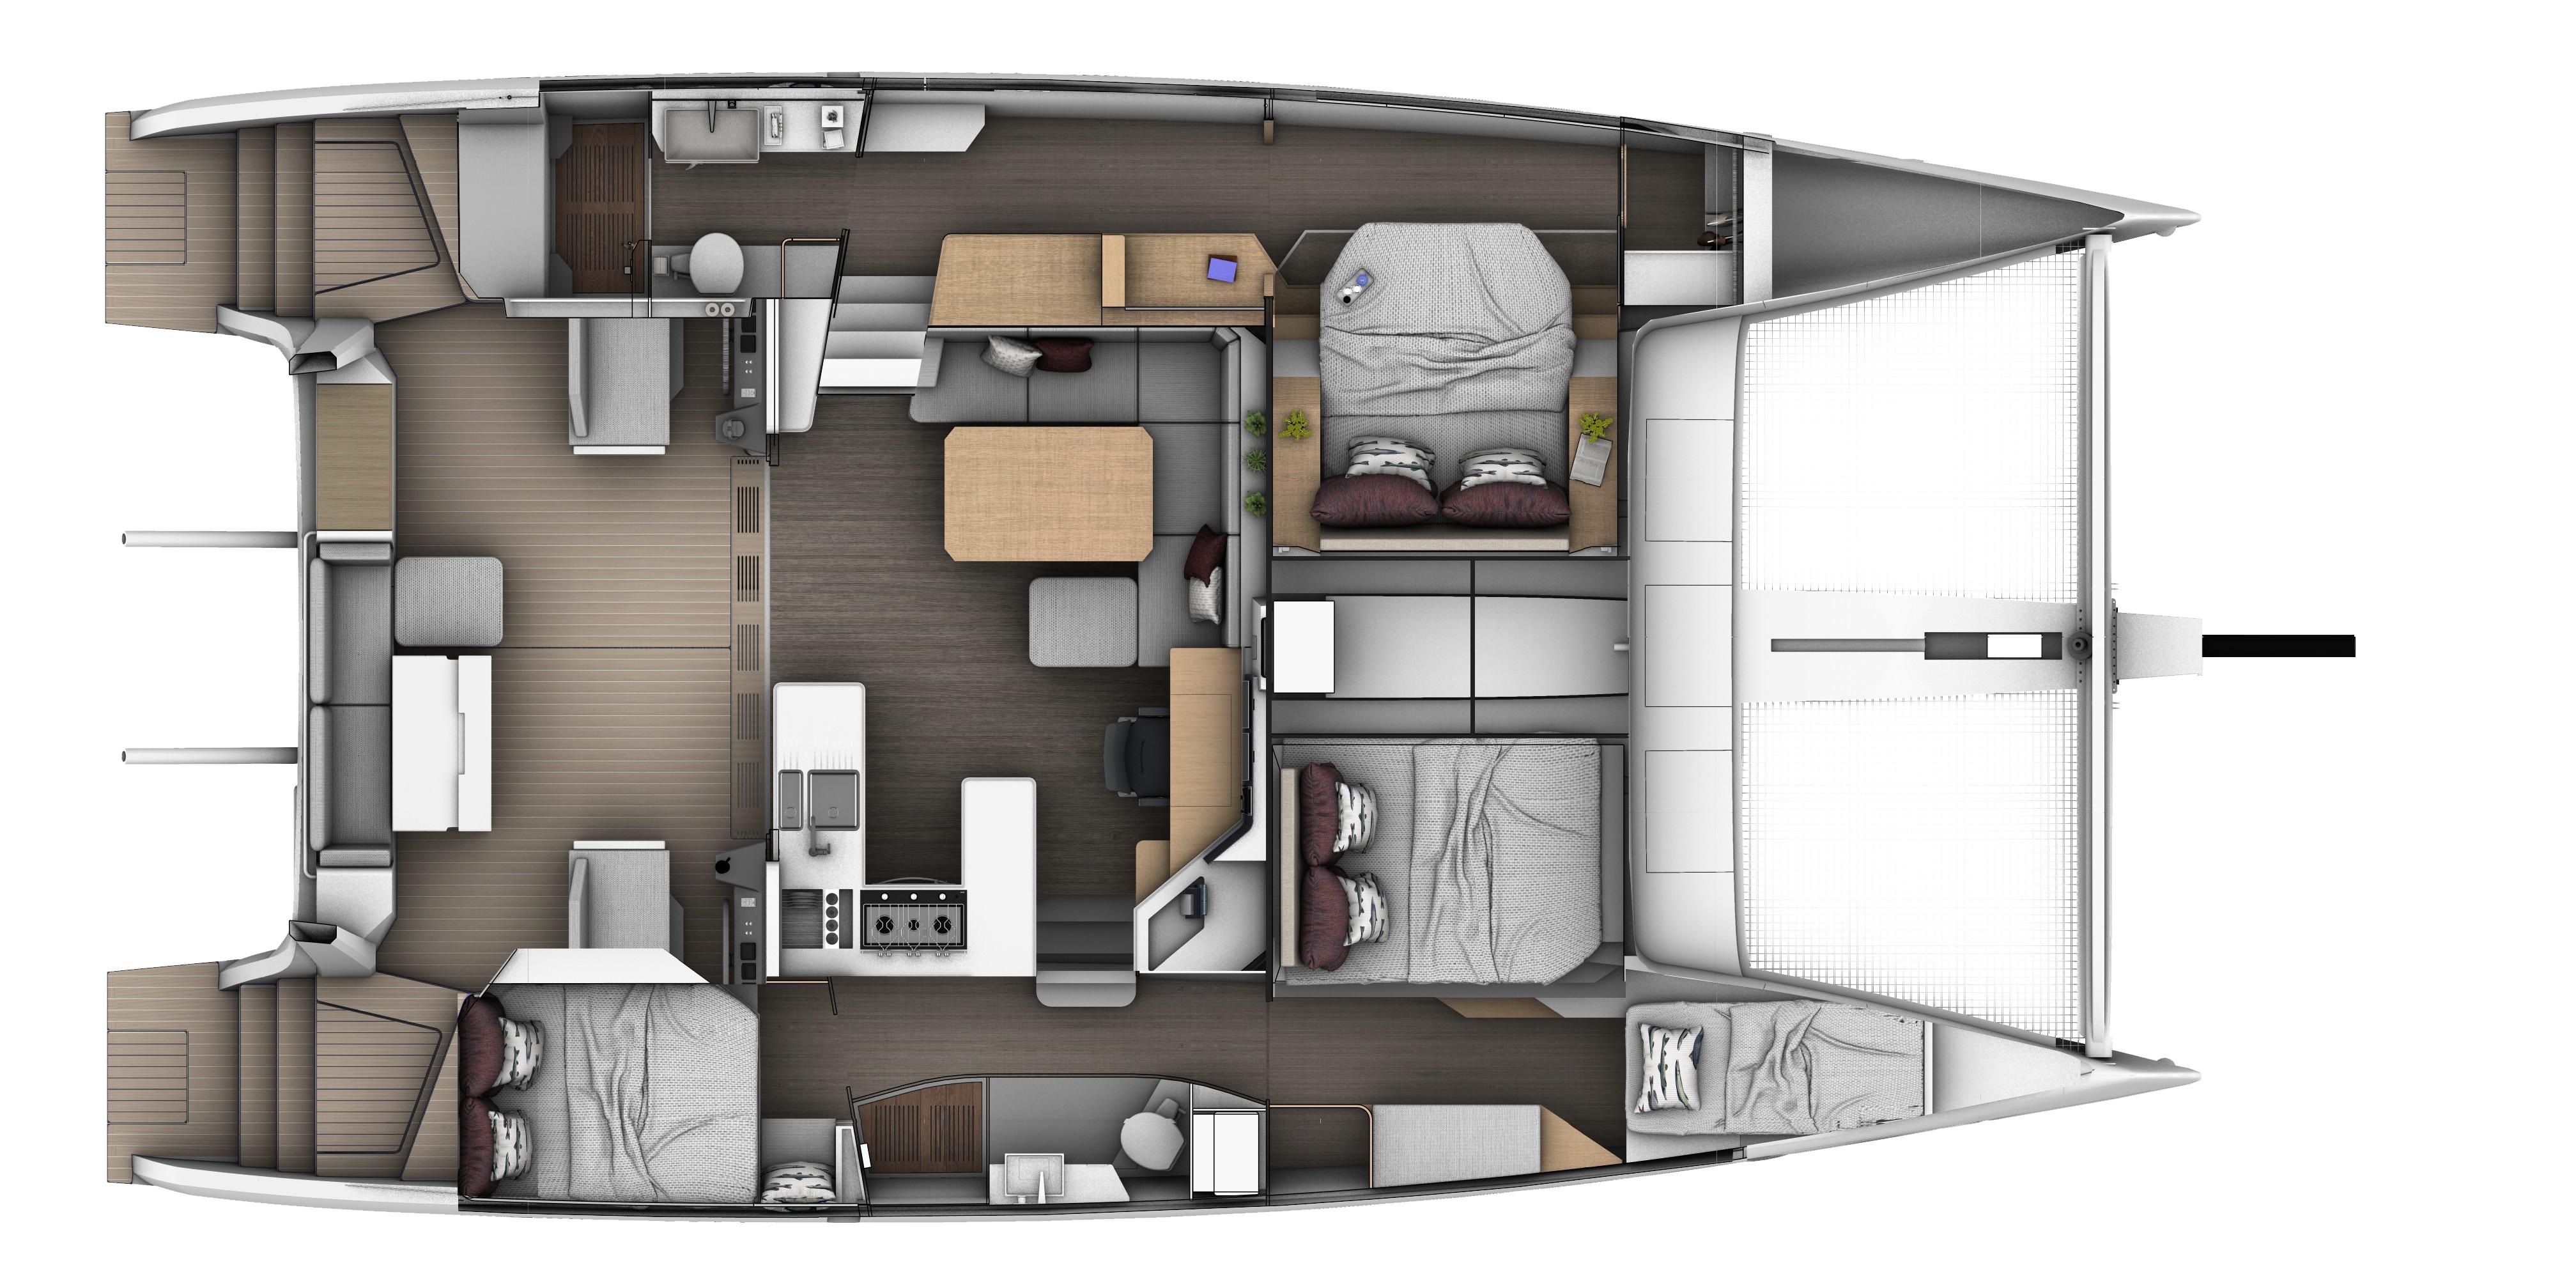 SEAWIND 1370 owners layout 2 heads layout